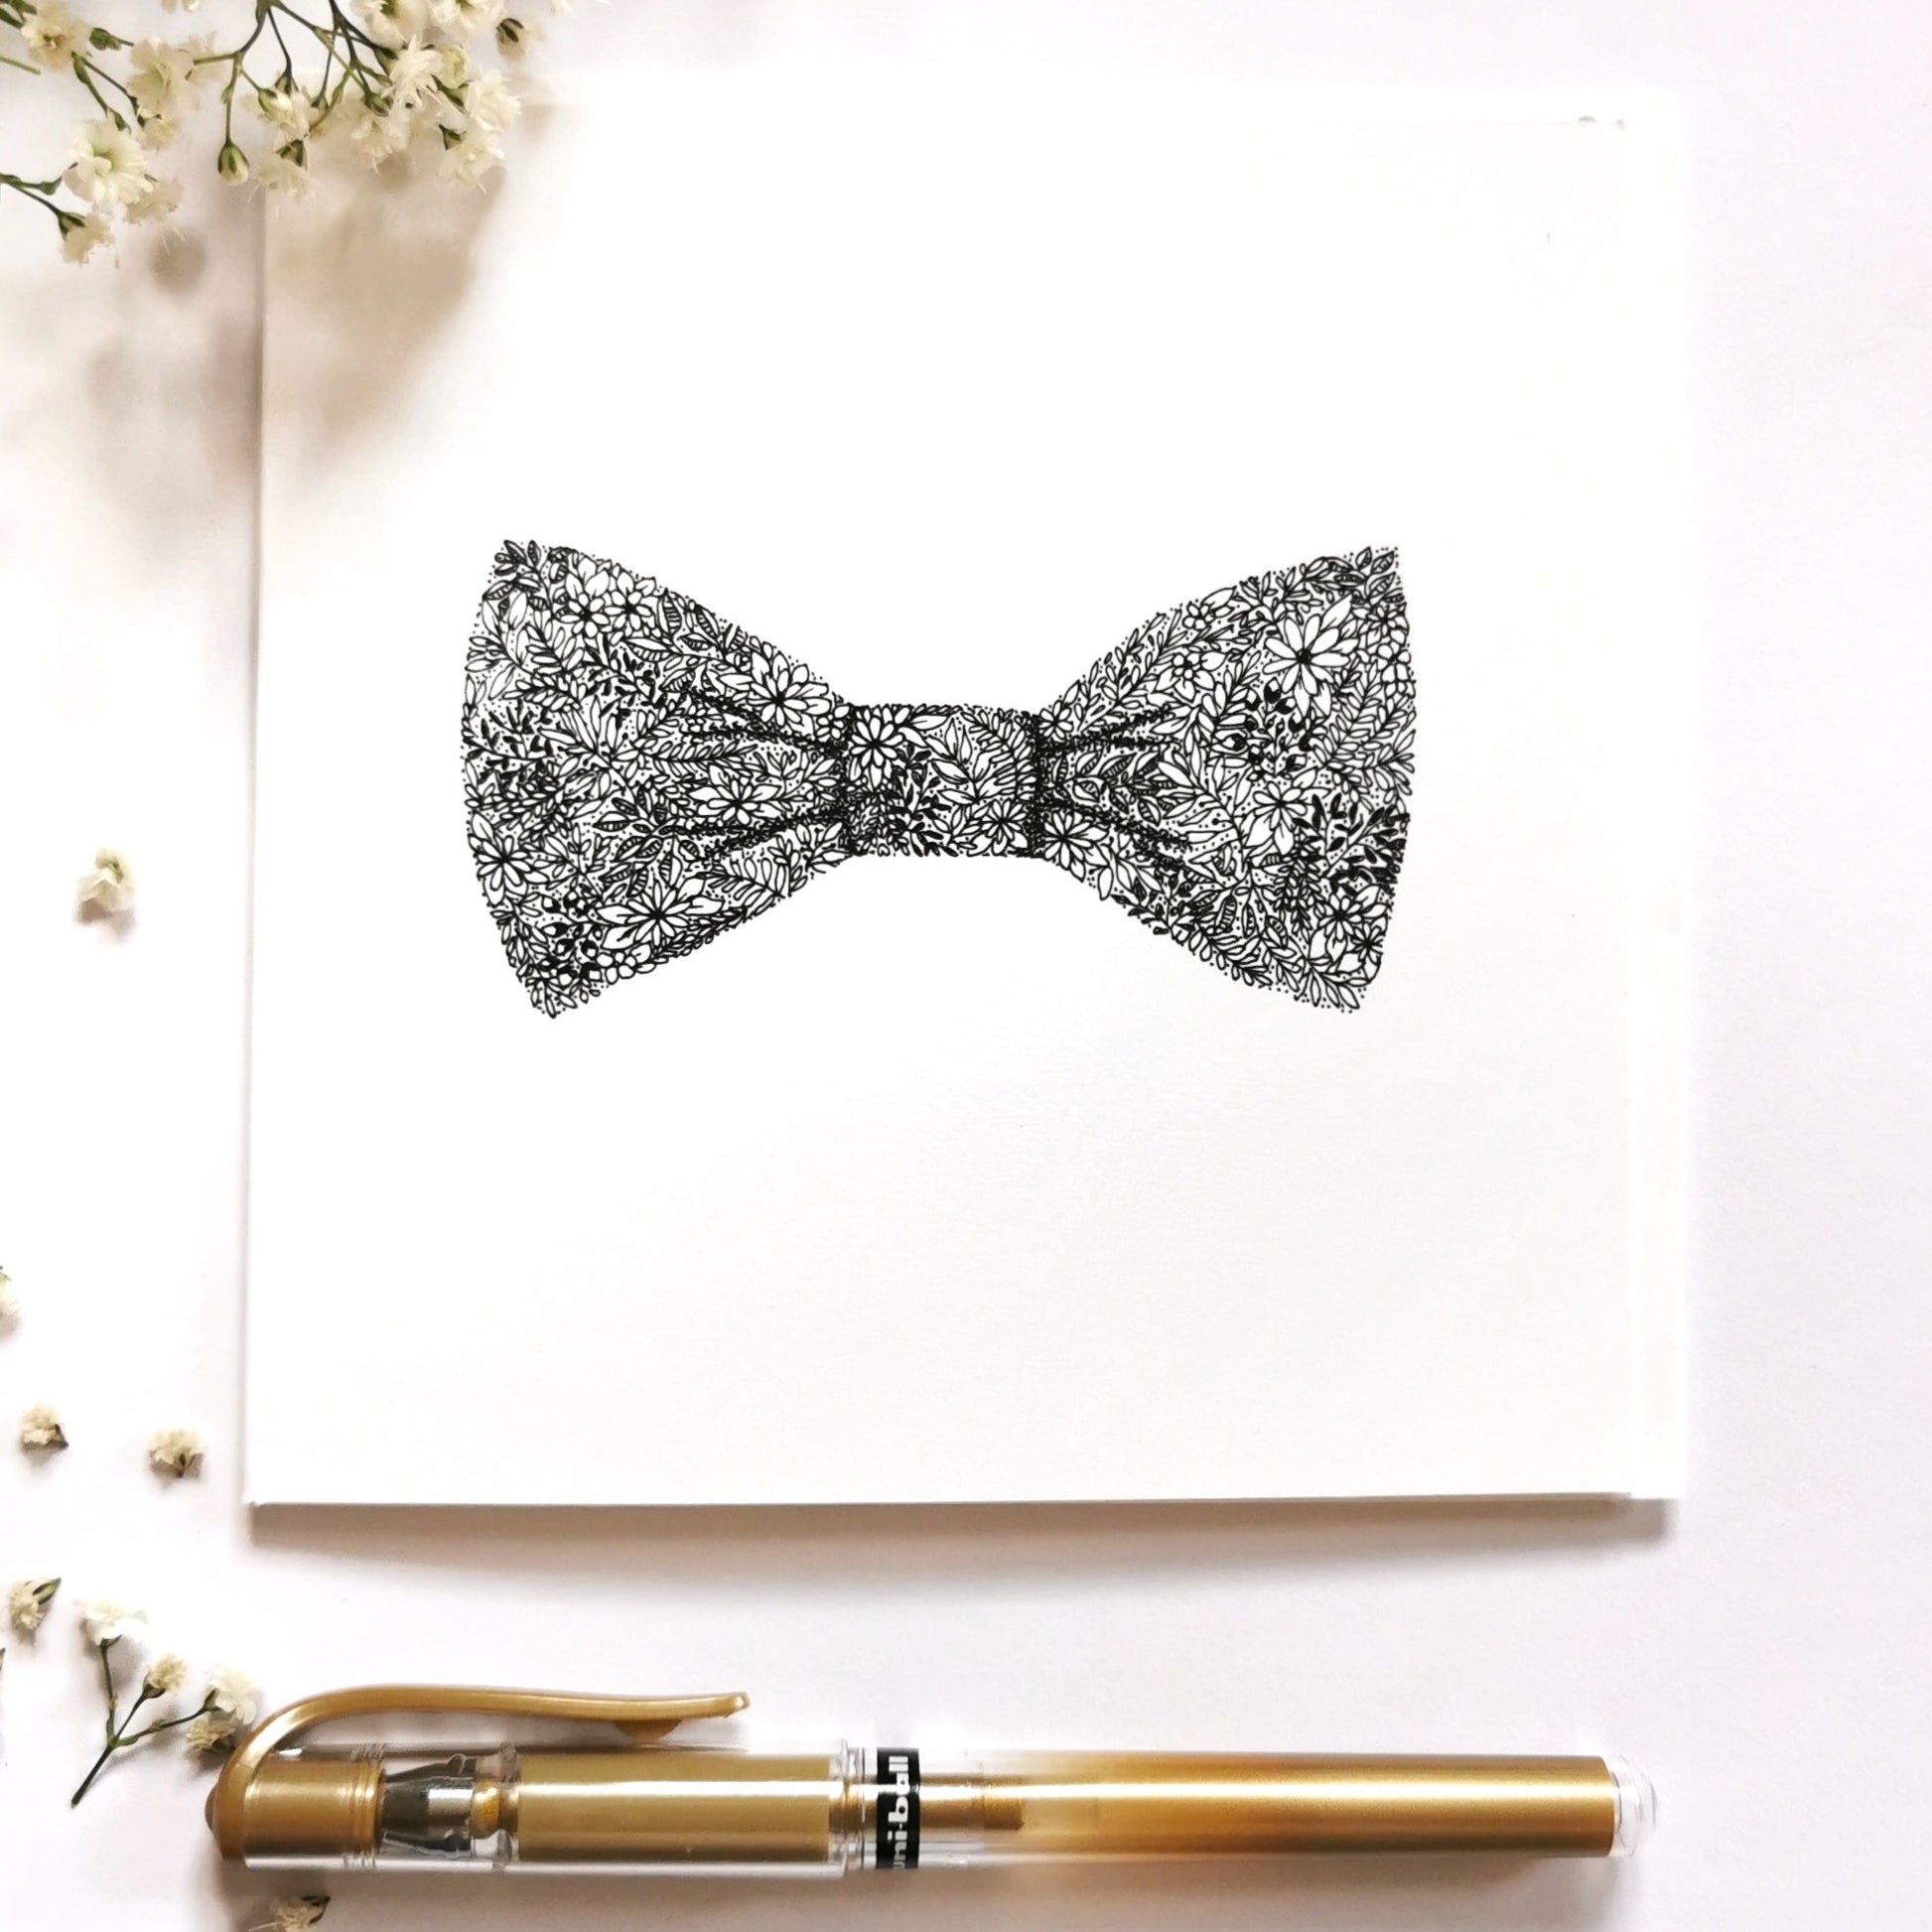 Illustrations shows black and white bow drawing made up from variety of flowers and plants. Bow is placed centre middle of image with a gold pen at the bottom of the picture and a few white blossom flowers on the bottom and top left corner to show what image would look dressed up.